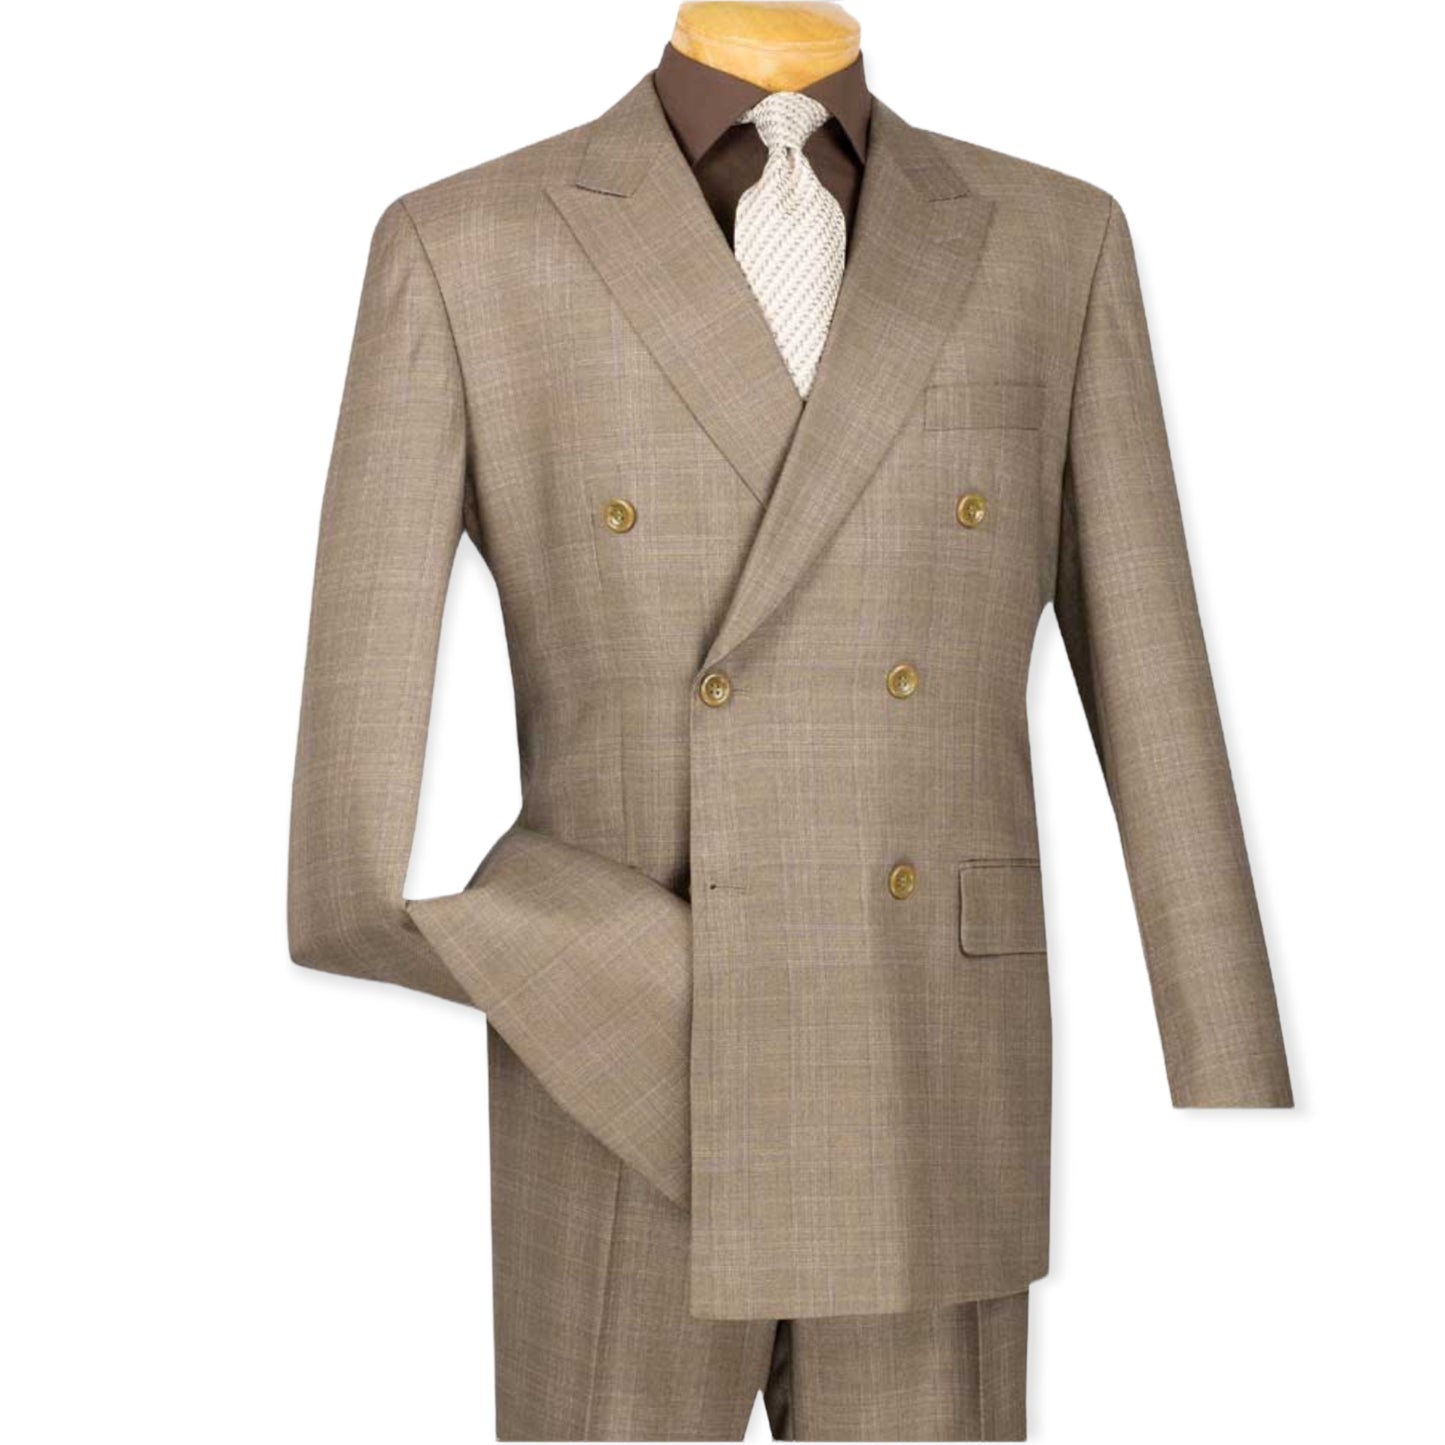 VINCI: Executive 2pc Double Breasted Suit DRW-1